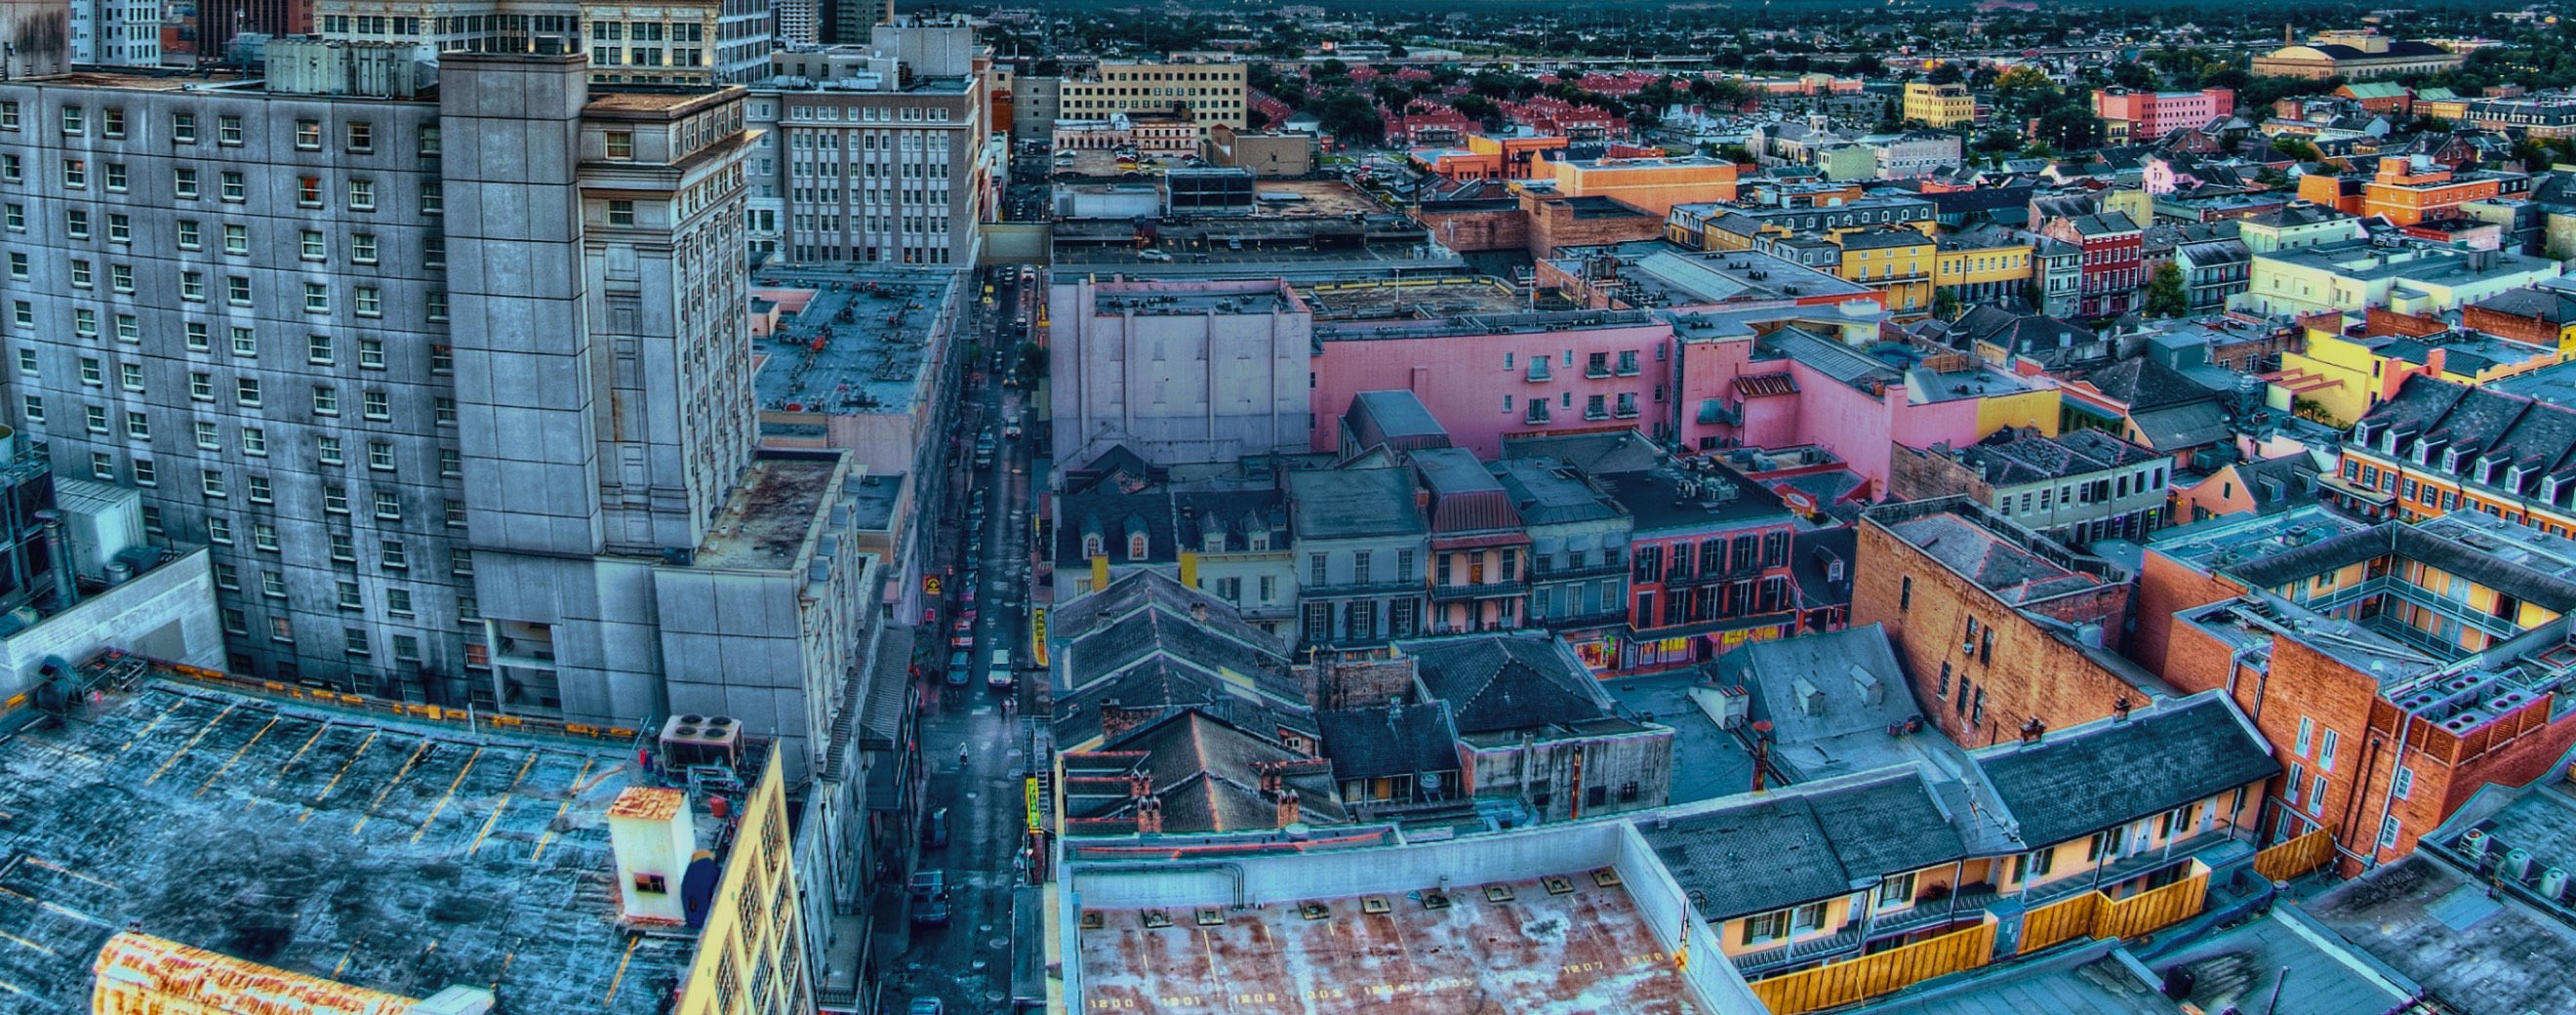 View of New Orleans